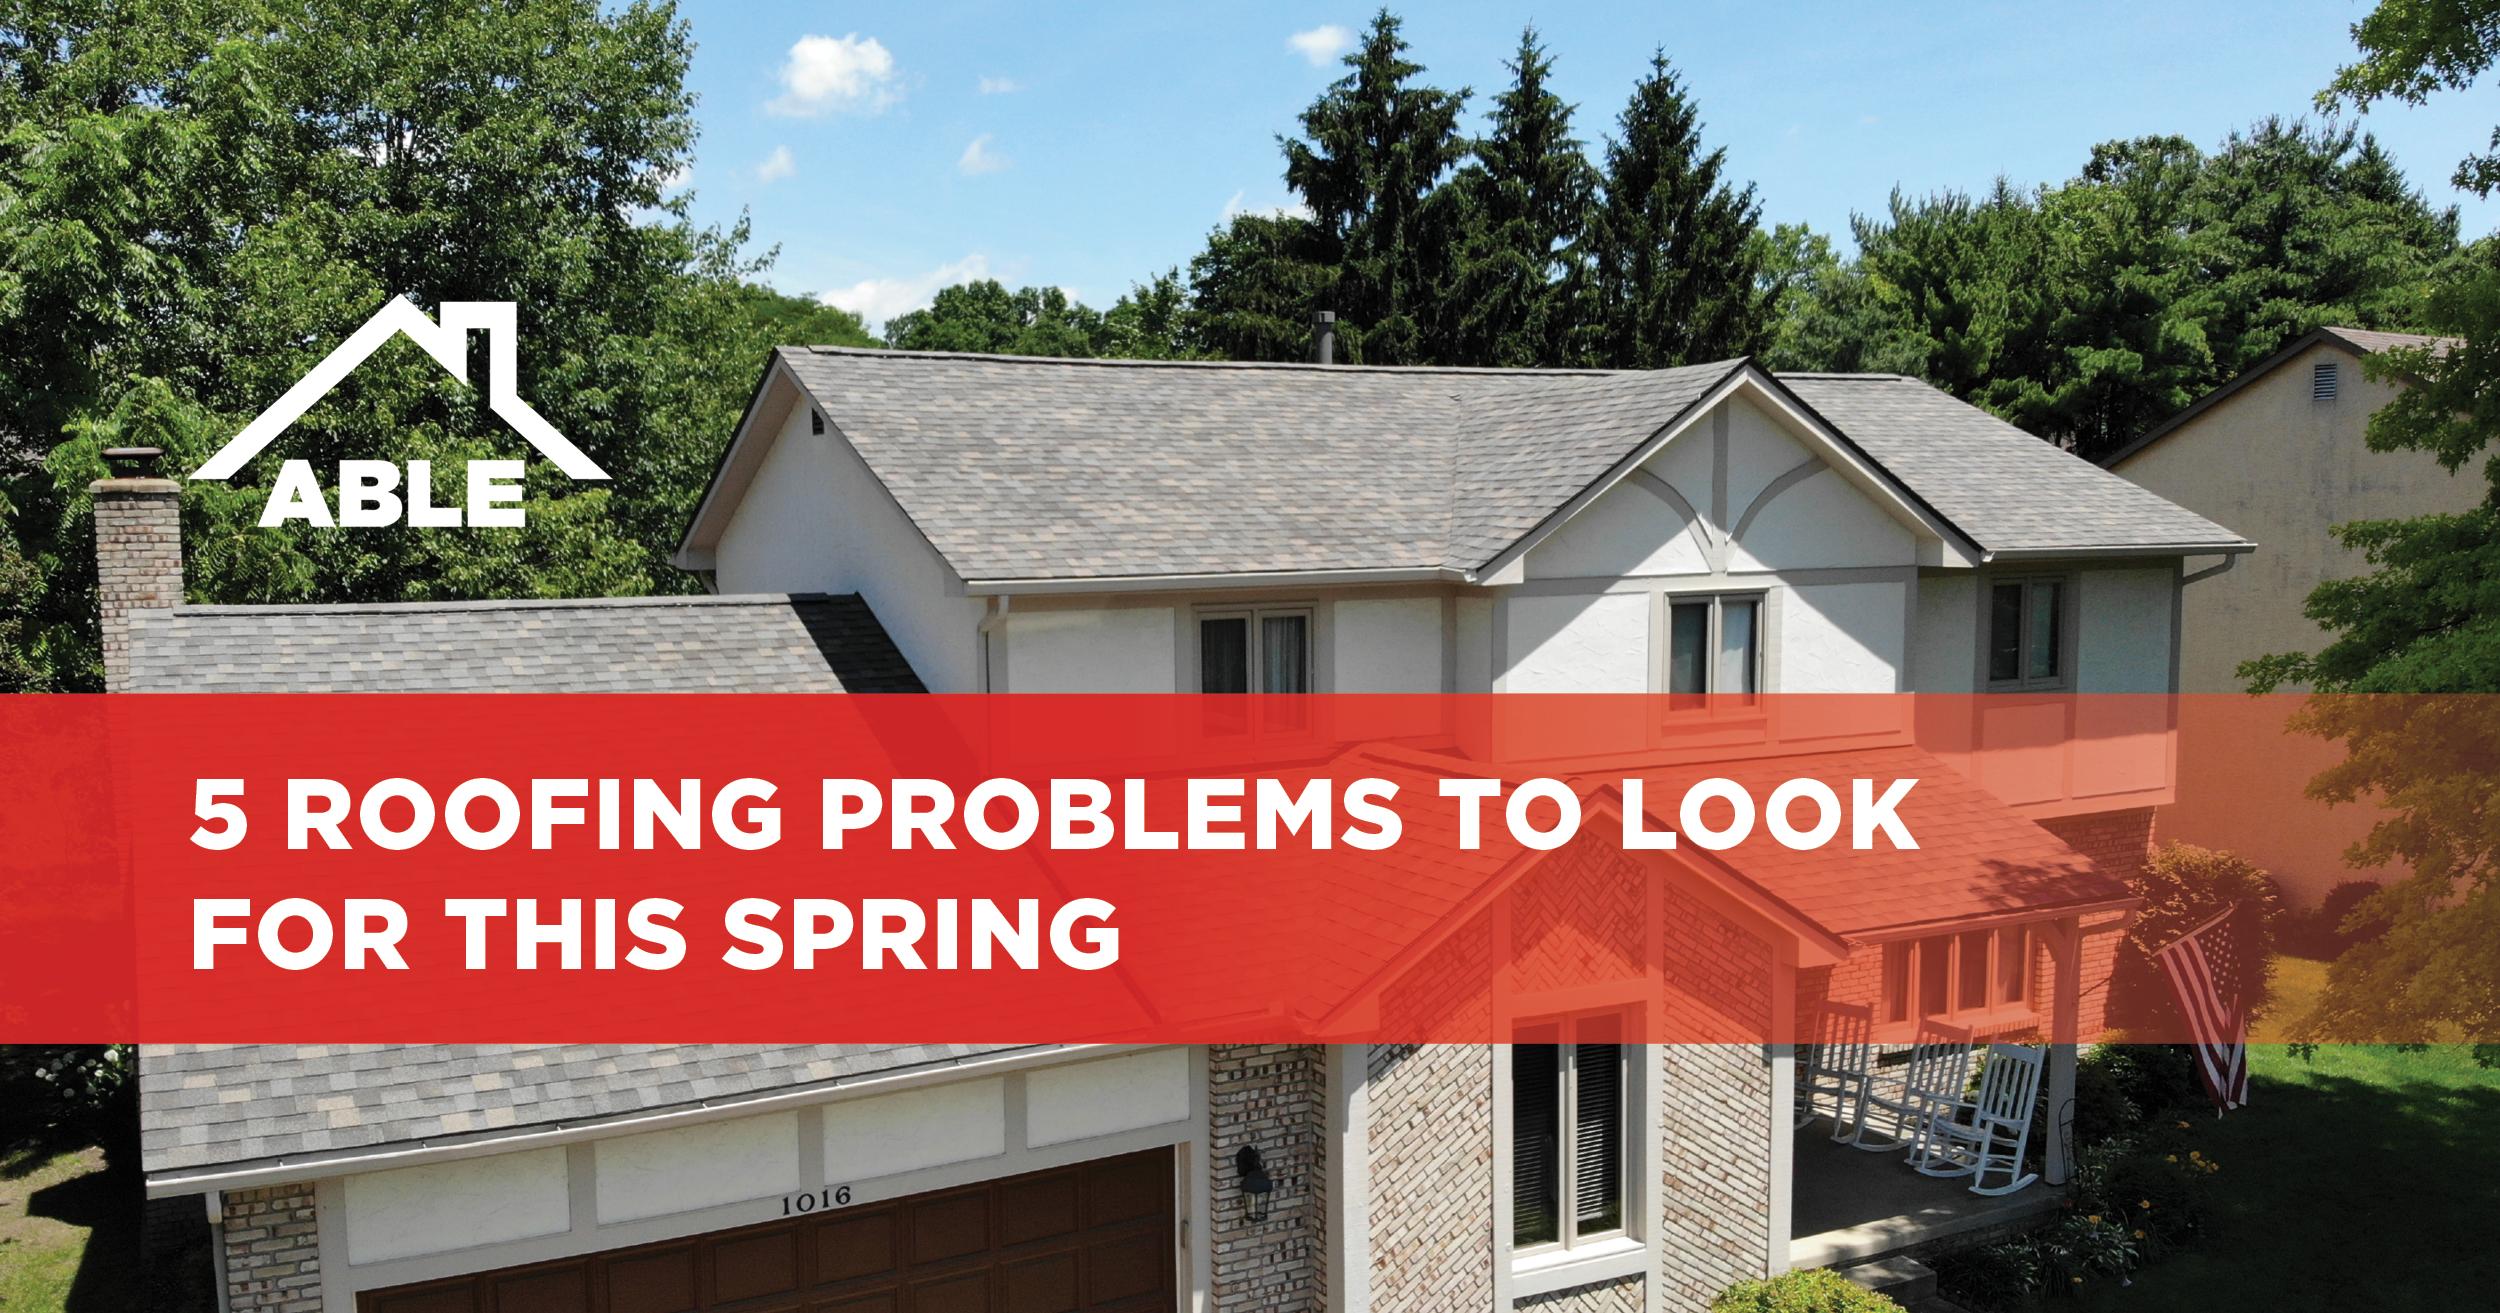 5 roofing problems to look for this spring